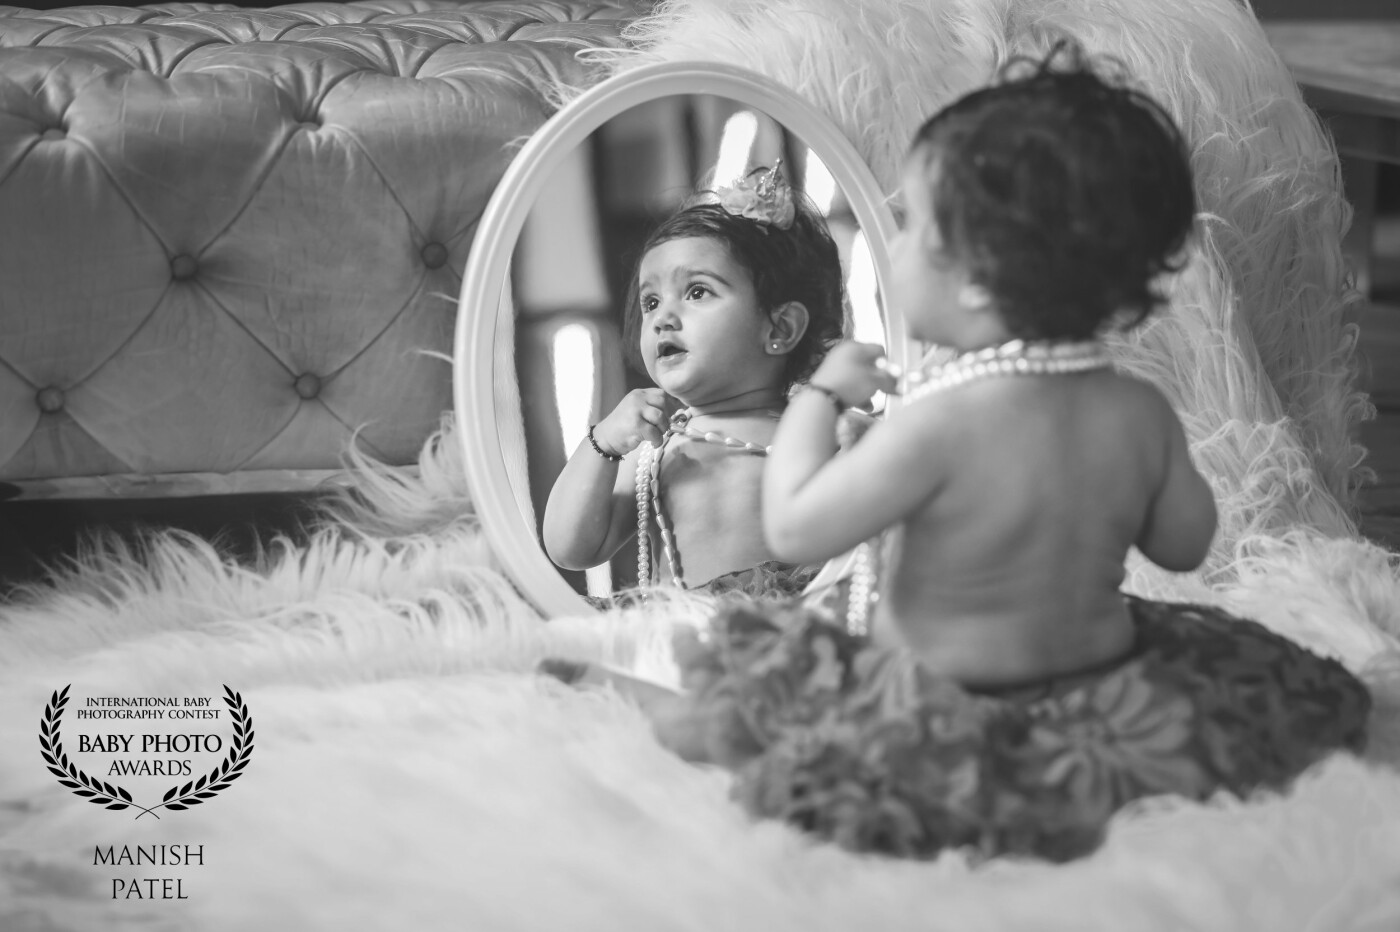 The Mirror reflection of her Is Just Like The Love Of God is Reflecting Blessing on her.<br />
I like to create interesting compositions, a sense of legend or a kind of dream .<br />
This sweet little baby girl had an adorable smile that I was elated to capture.